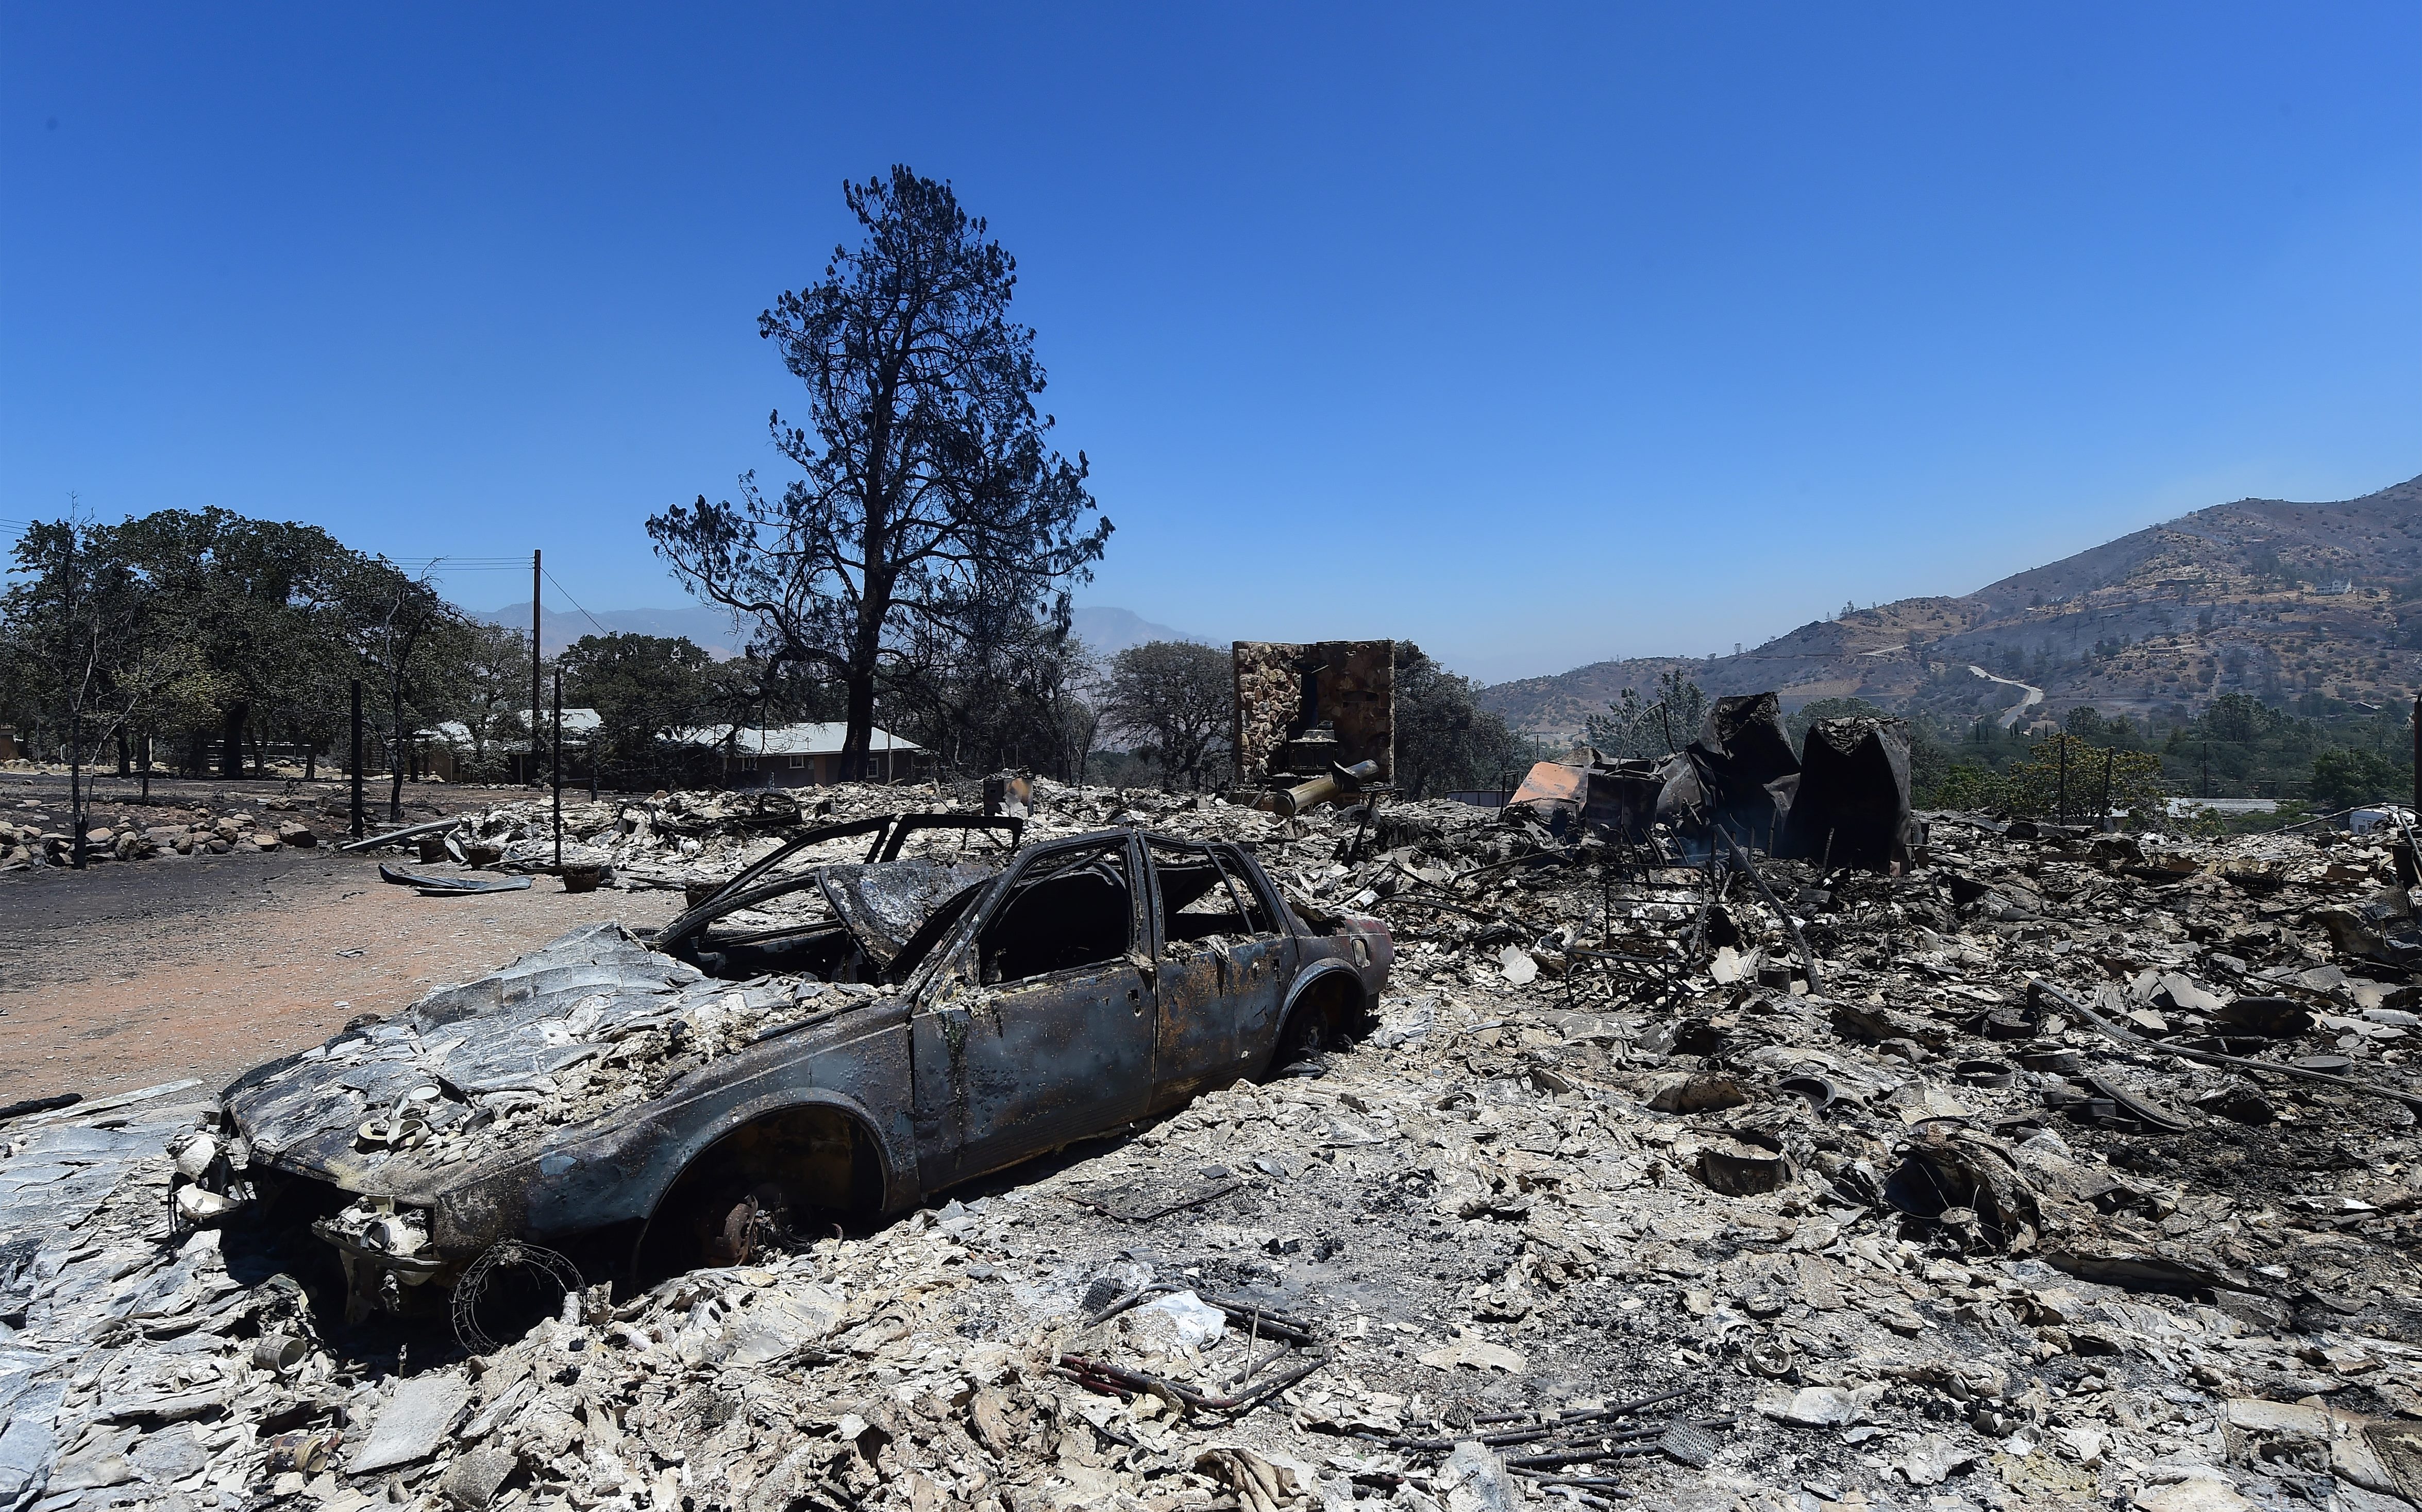 Rubble from a demolished home with vehicle out front are seen in the community of Squirrel Valley in Lake Isabella, California on June 24, 2016. An intense wildfire broke out yesterday afternoon scorched dozens of homes and structures in this mountainous community northeast of Bakersfield in Kern County. / AFP PHOTO / FREDERIC J. BROWN